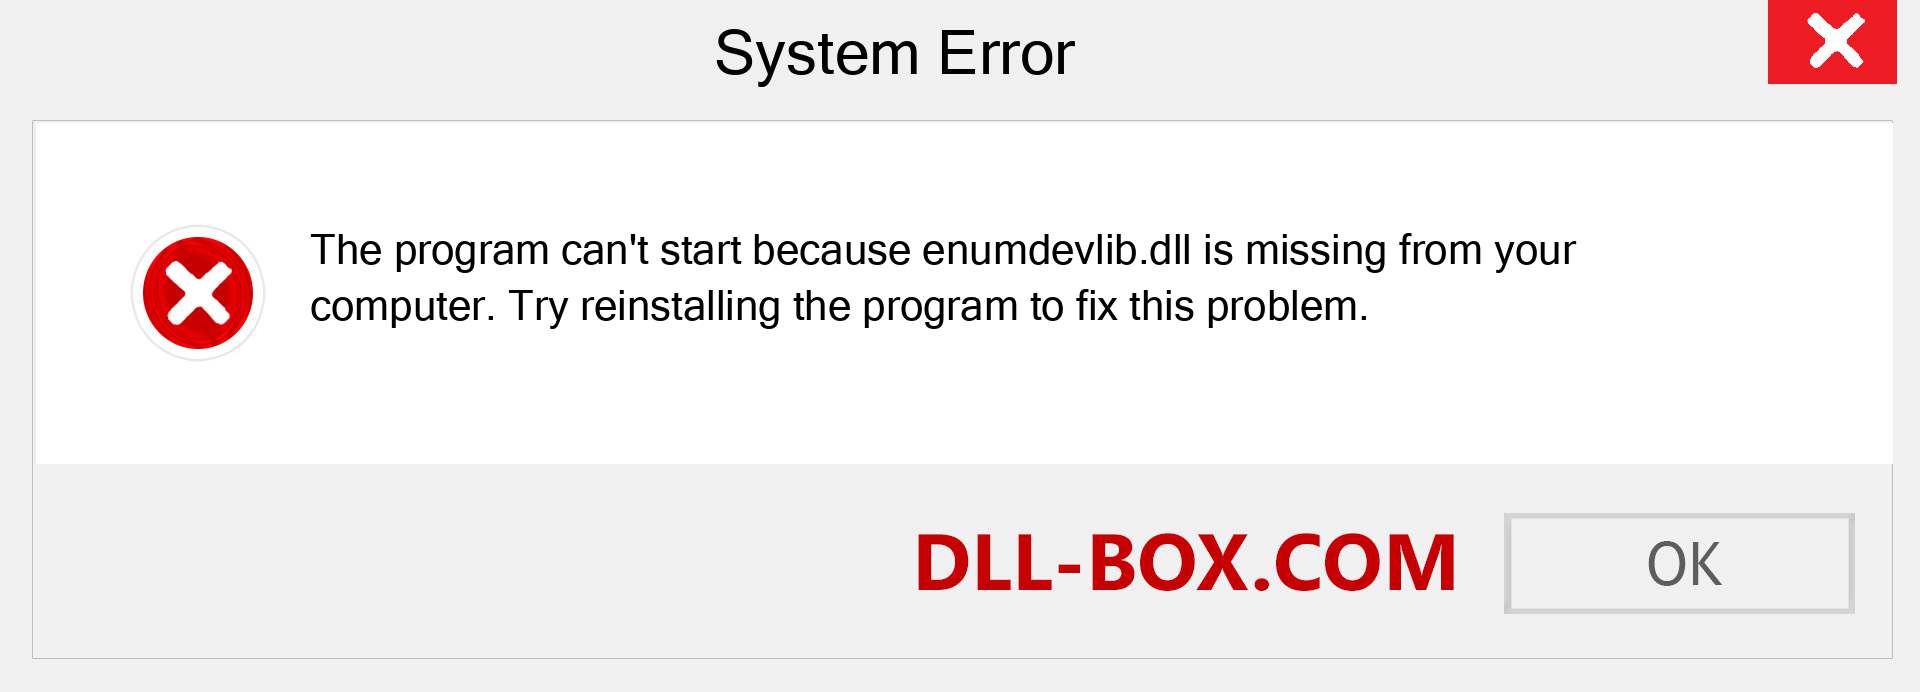  enumdevlib.dll file is missing?. Download for Windows 7, 8, 10 - Fix  enumdevlib dll Missing Error on Windows, photos, images